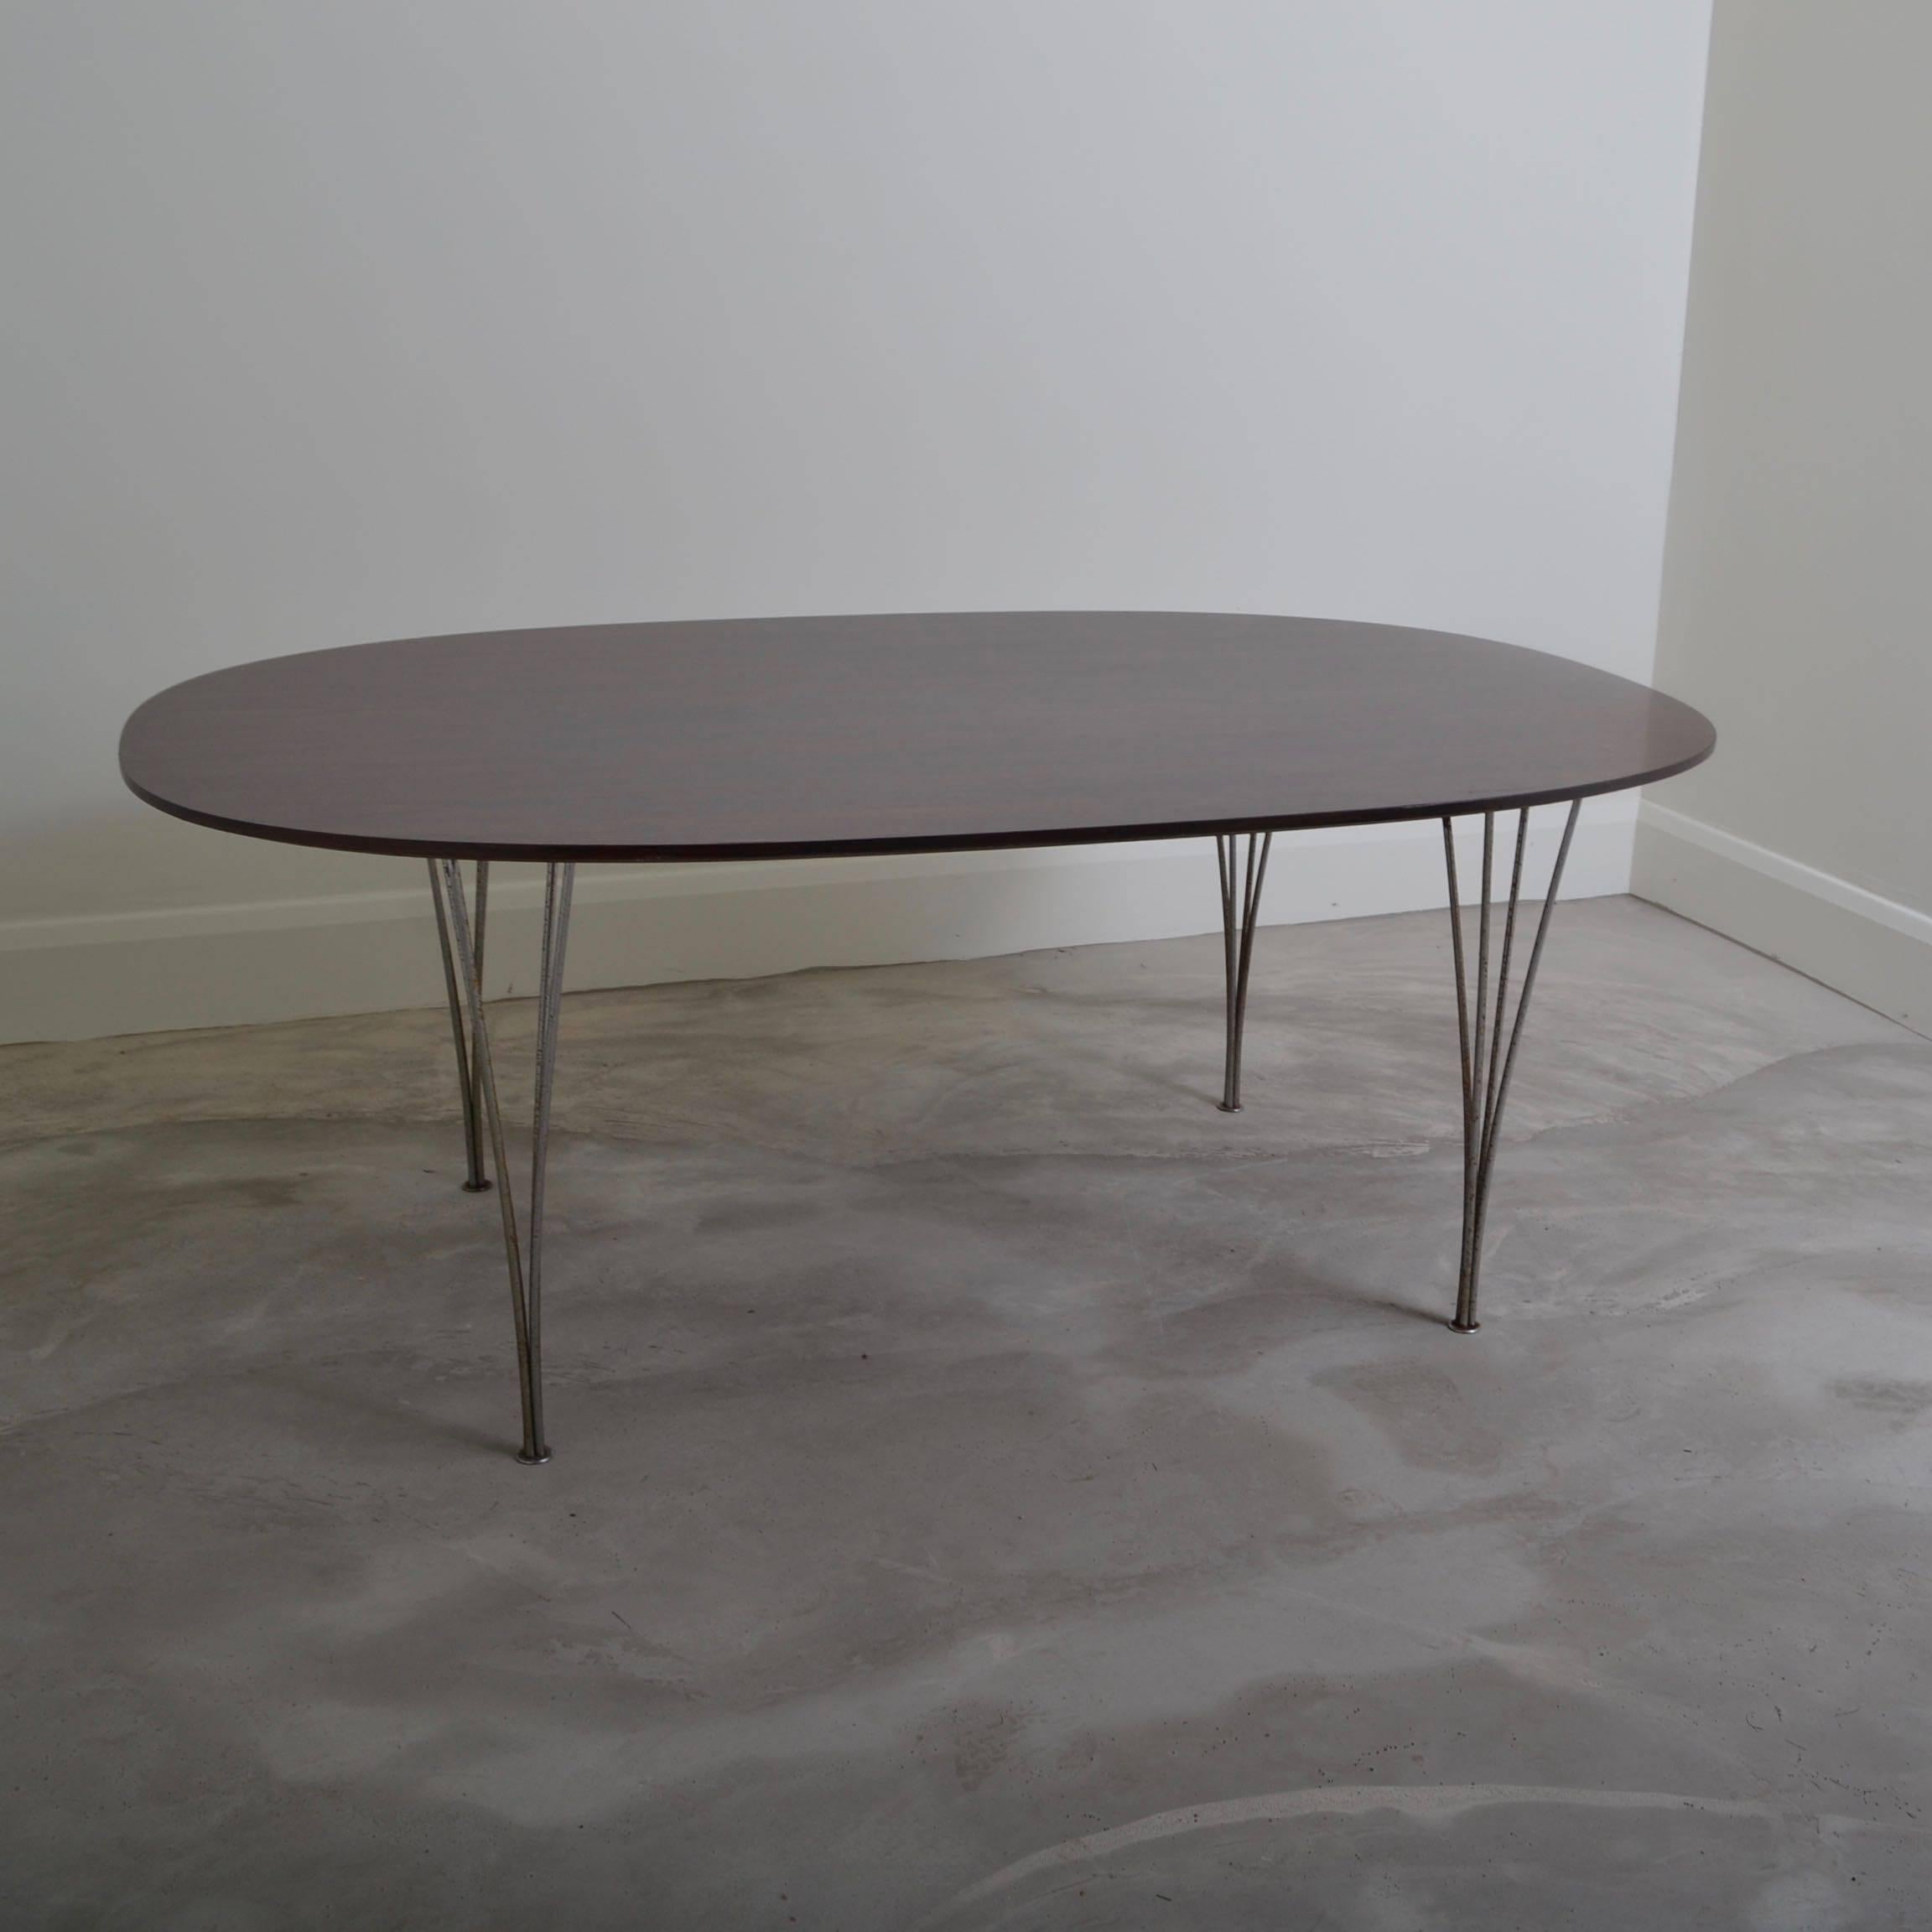 Super Ellipse dining table with chromed steel legs.
Designed by Piet Hein and Bruno Matthsson for Fritz Hansen ,
Denmark 1974 original label to underside.
The wood veneered top has been re-finished and the chromed steel legs are 
pitted with age